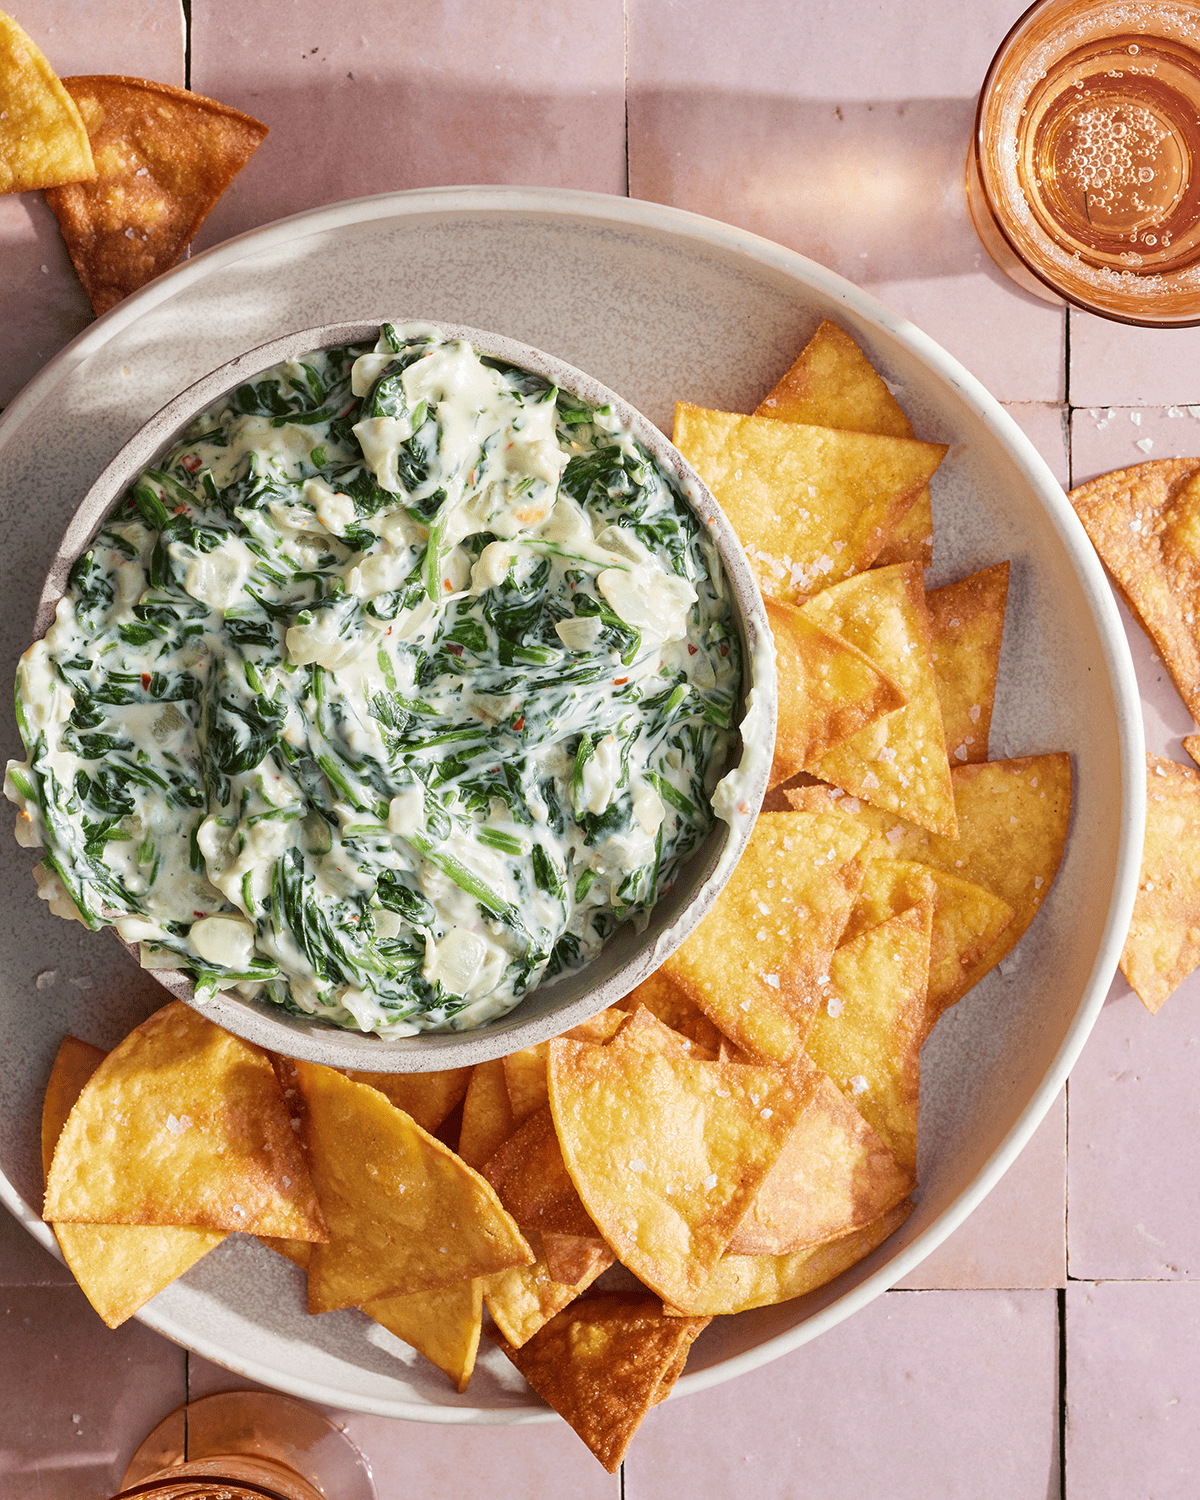 A bowl of Spinach dip next to some homemade tortilla chips.  